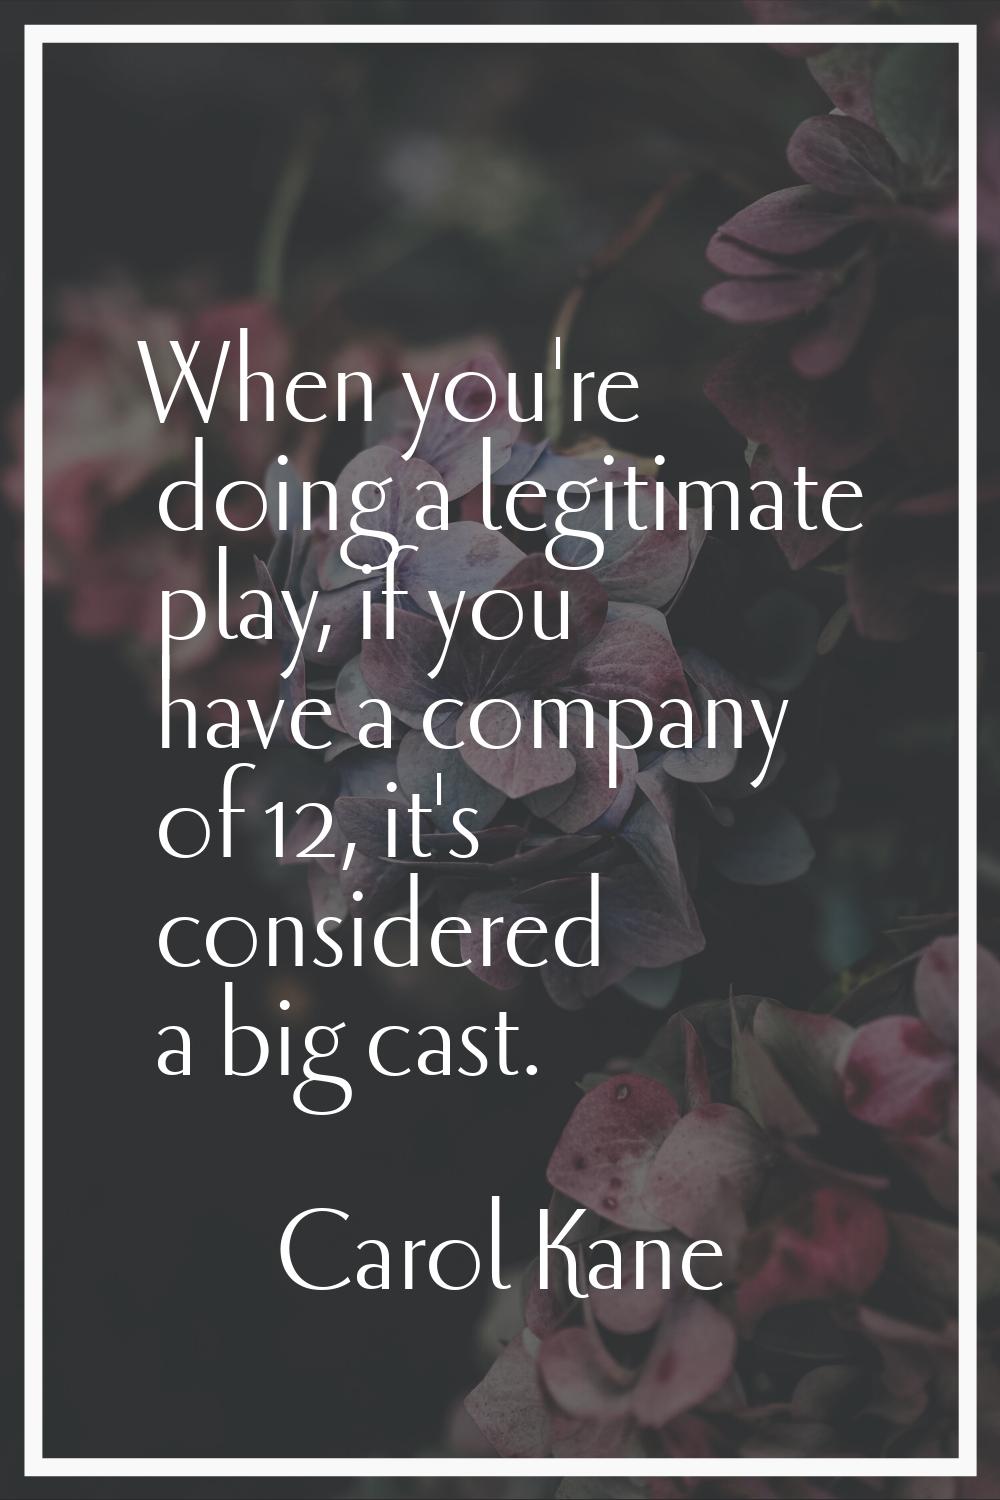 When you're doing a legitimate play, if you have a company of 12, it's considered a big cast.